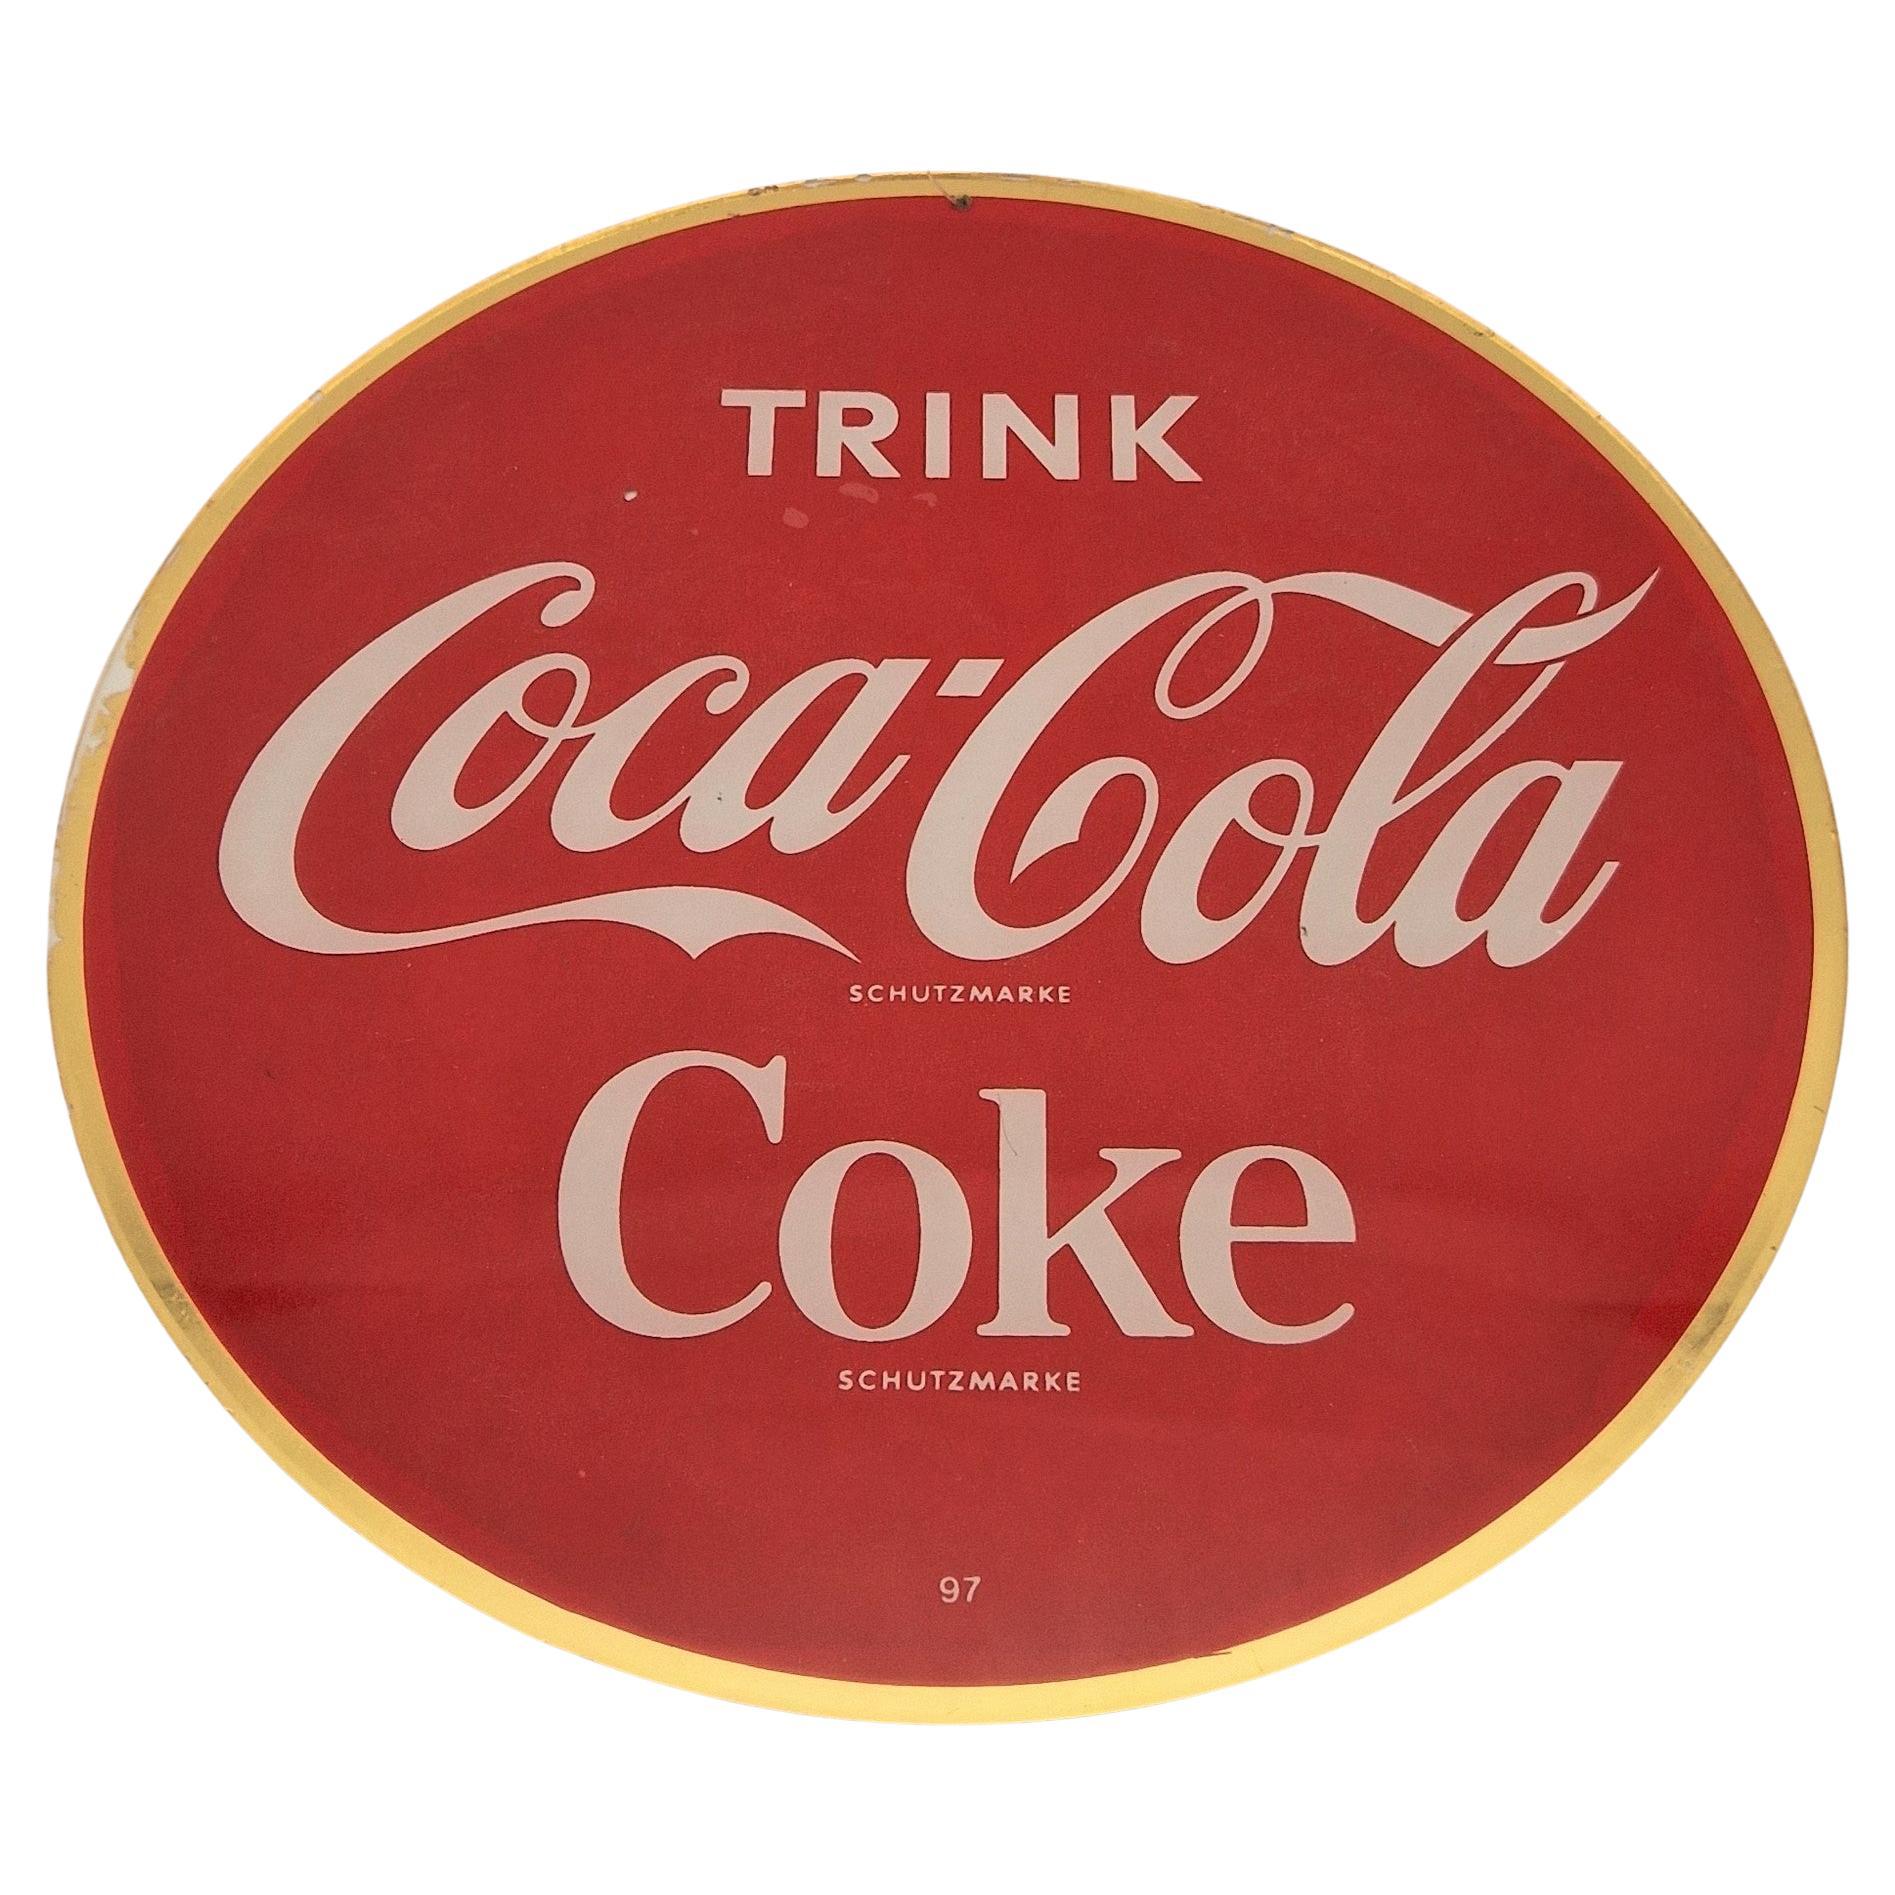 Advertising Glass Sign "Trink Coca Cola - Coke". 1950 - 1959 For Sale